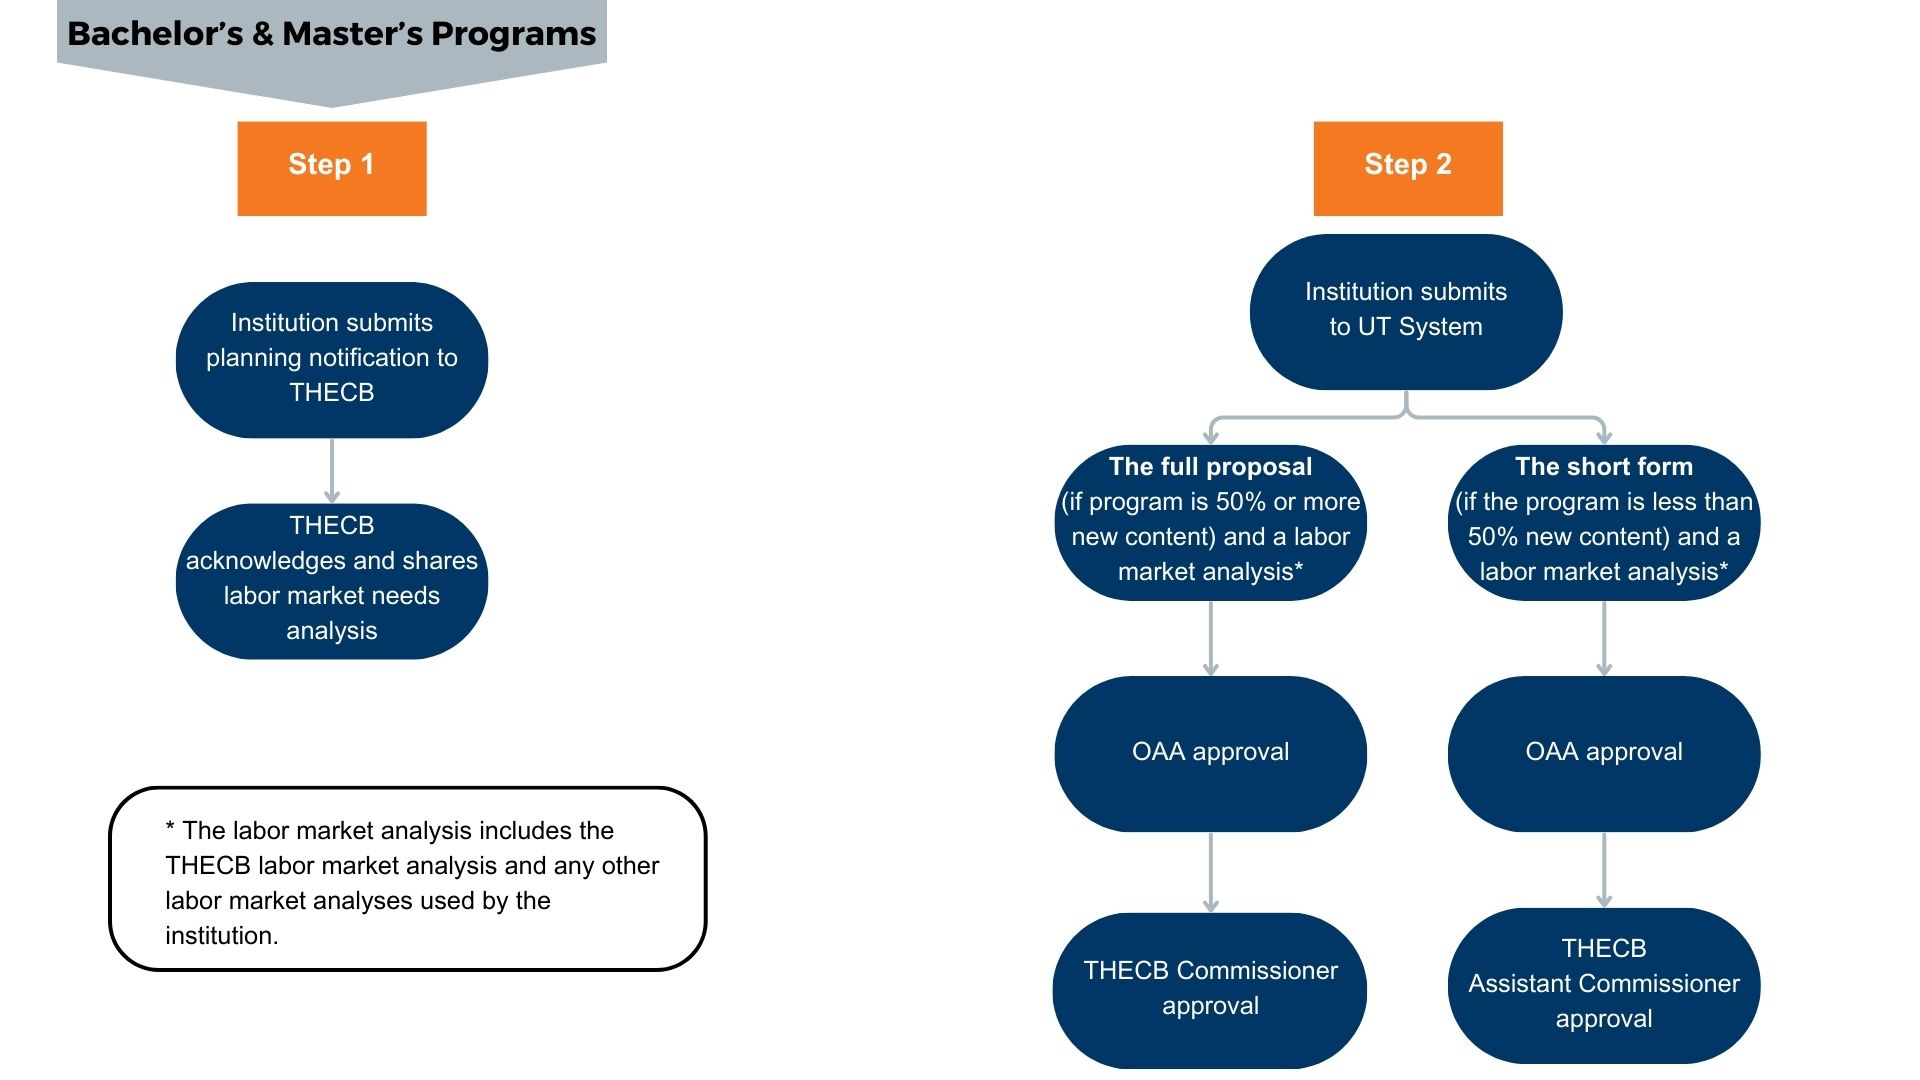 New Degree Program Approval Workflow for Bachelor's and Master's Degrees